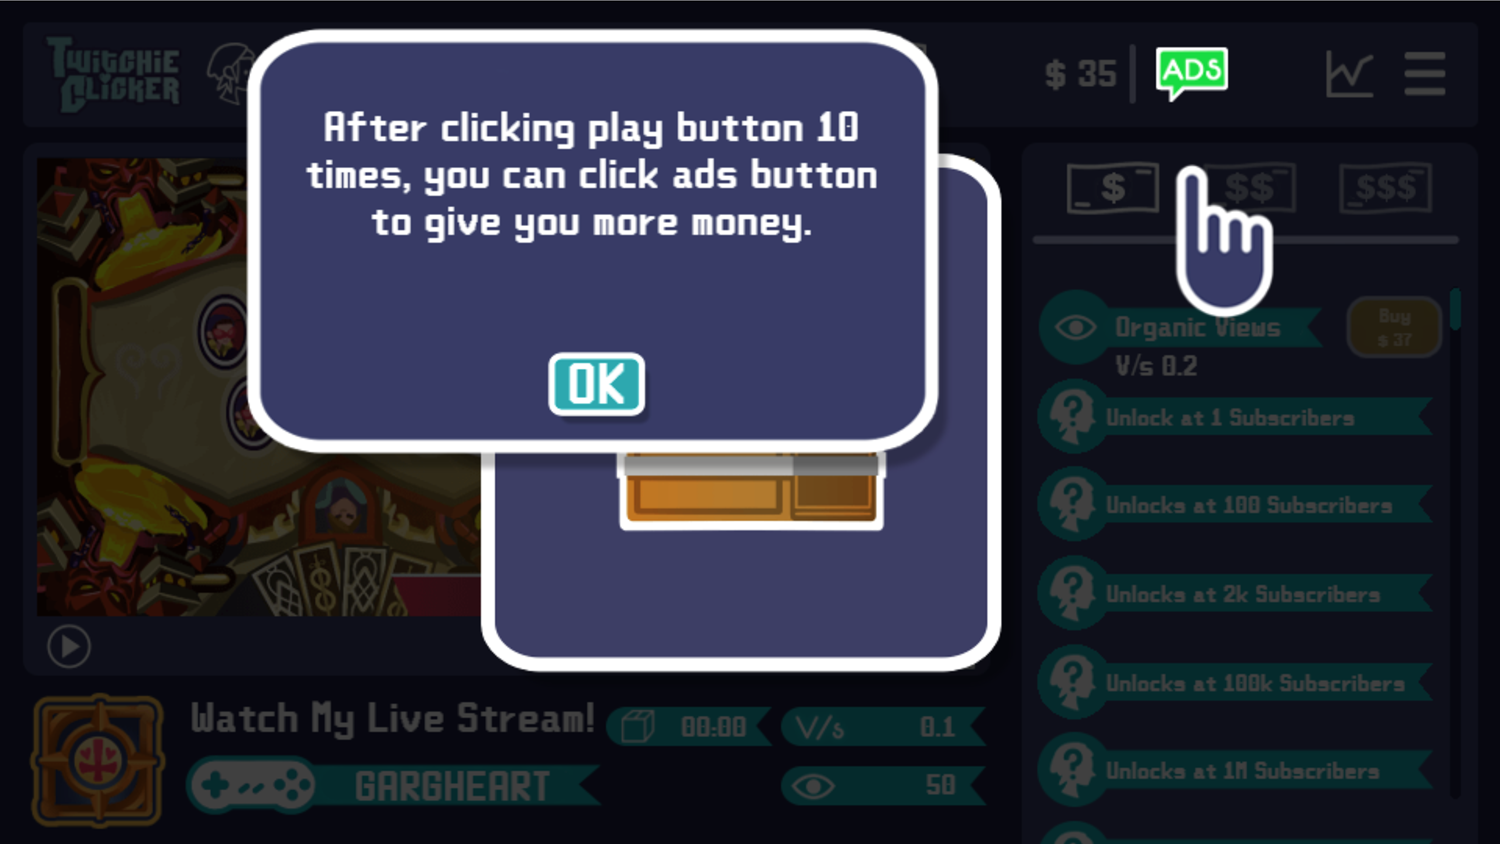 Twitchie Clicker Game Collect Extra Ad Income Information Screen Screenshot.